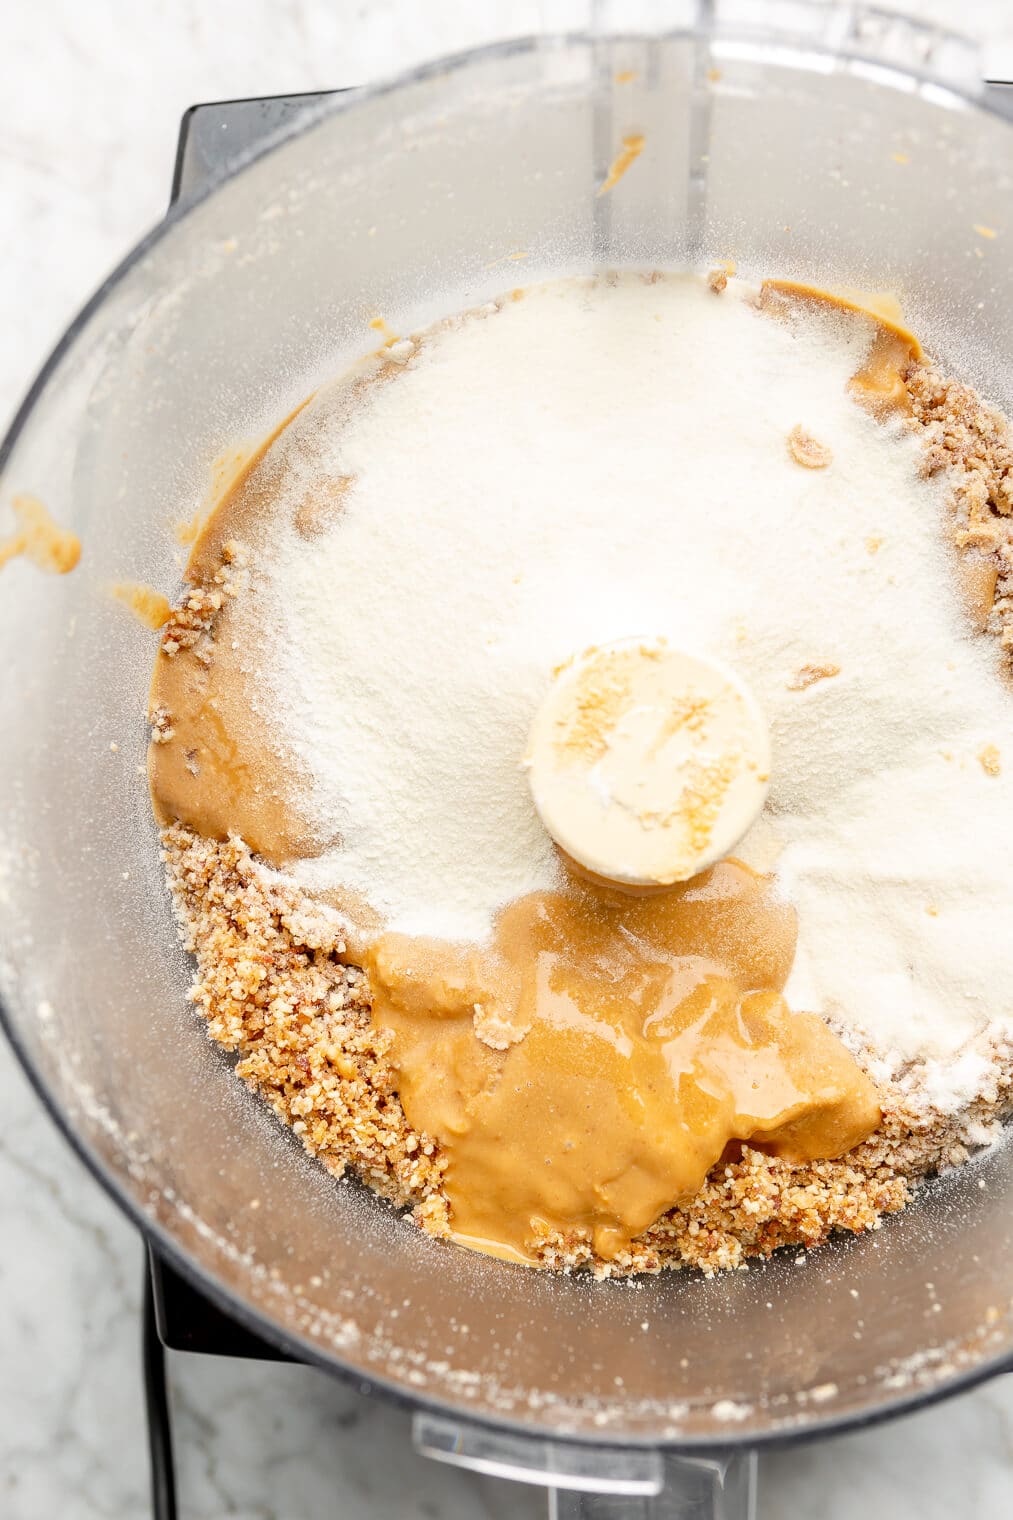 Peanut butter and collagen peptides in a food processor blender.